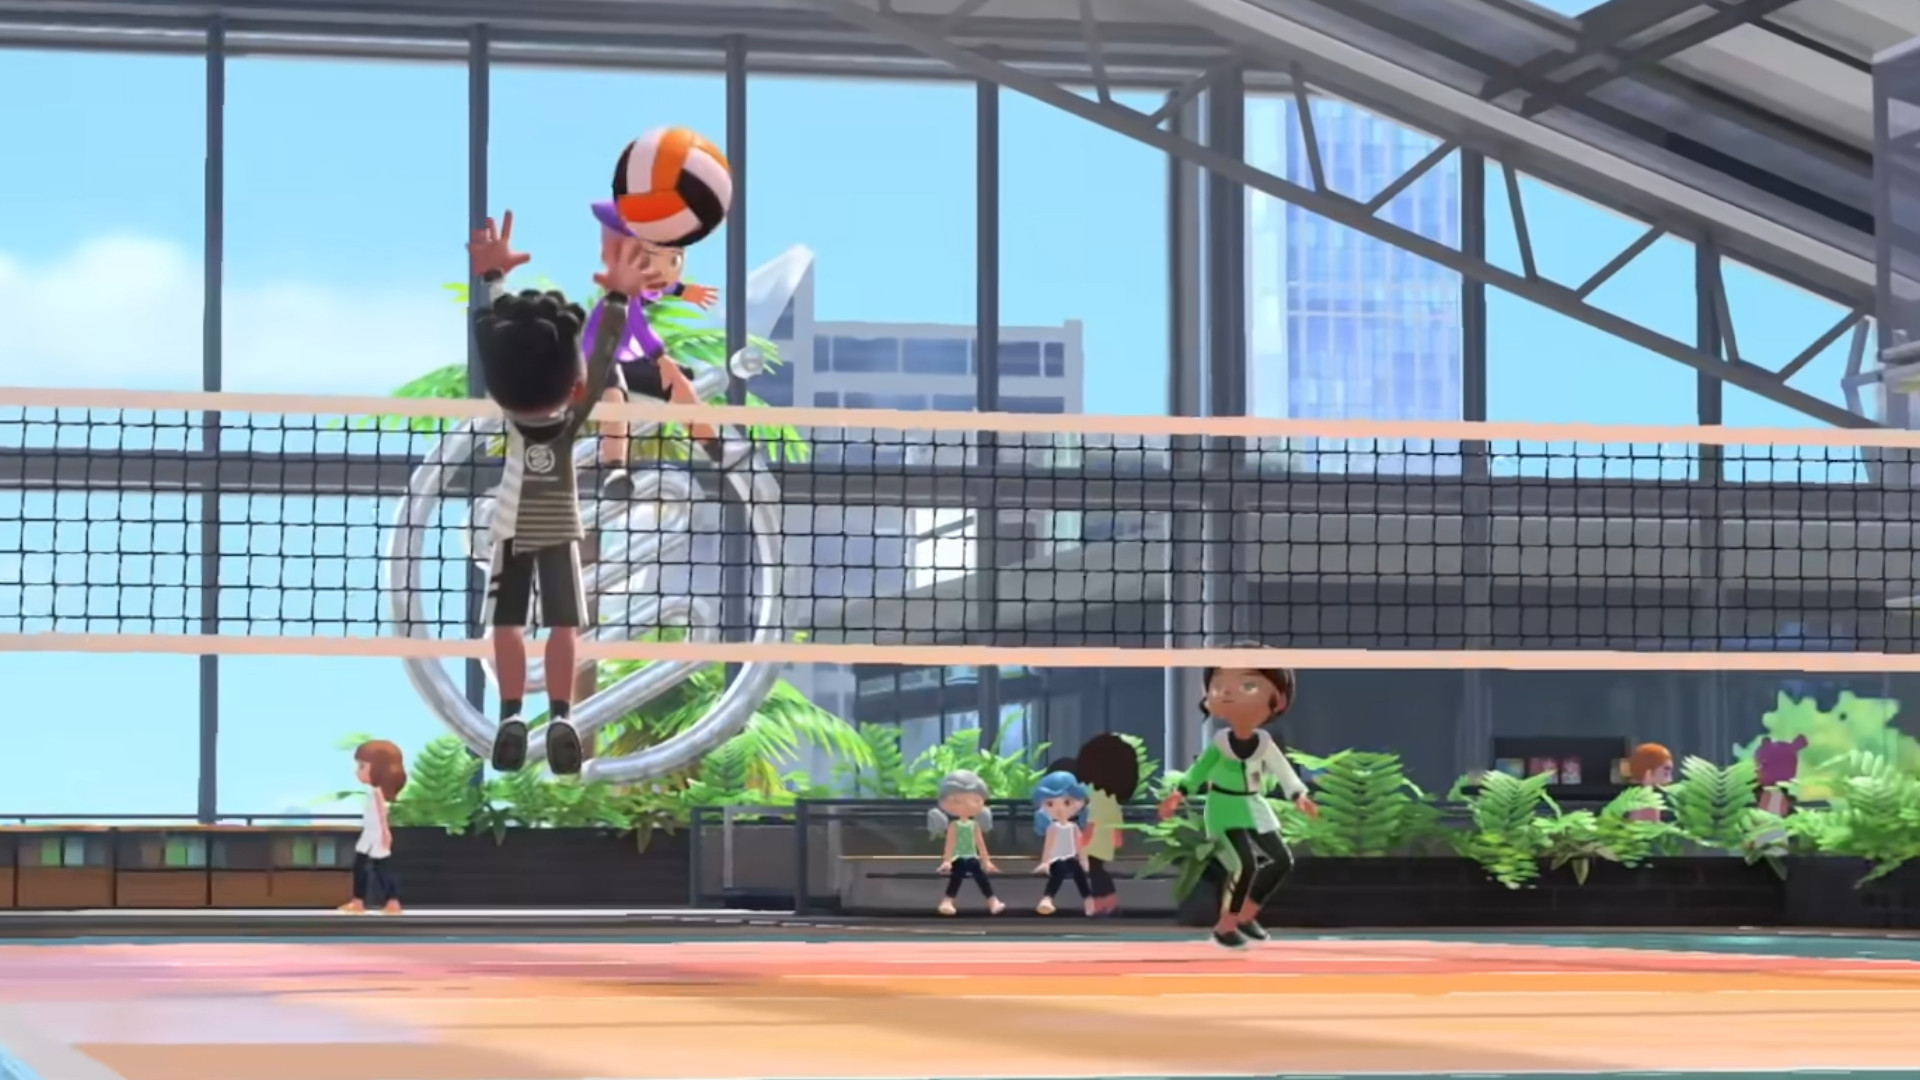 Nintendo Switch Sports Is Finally Coming